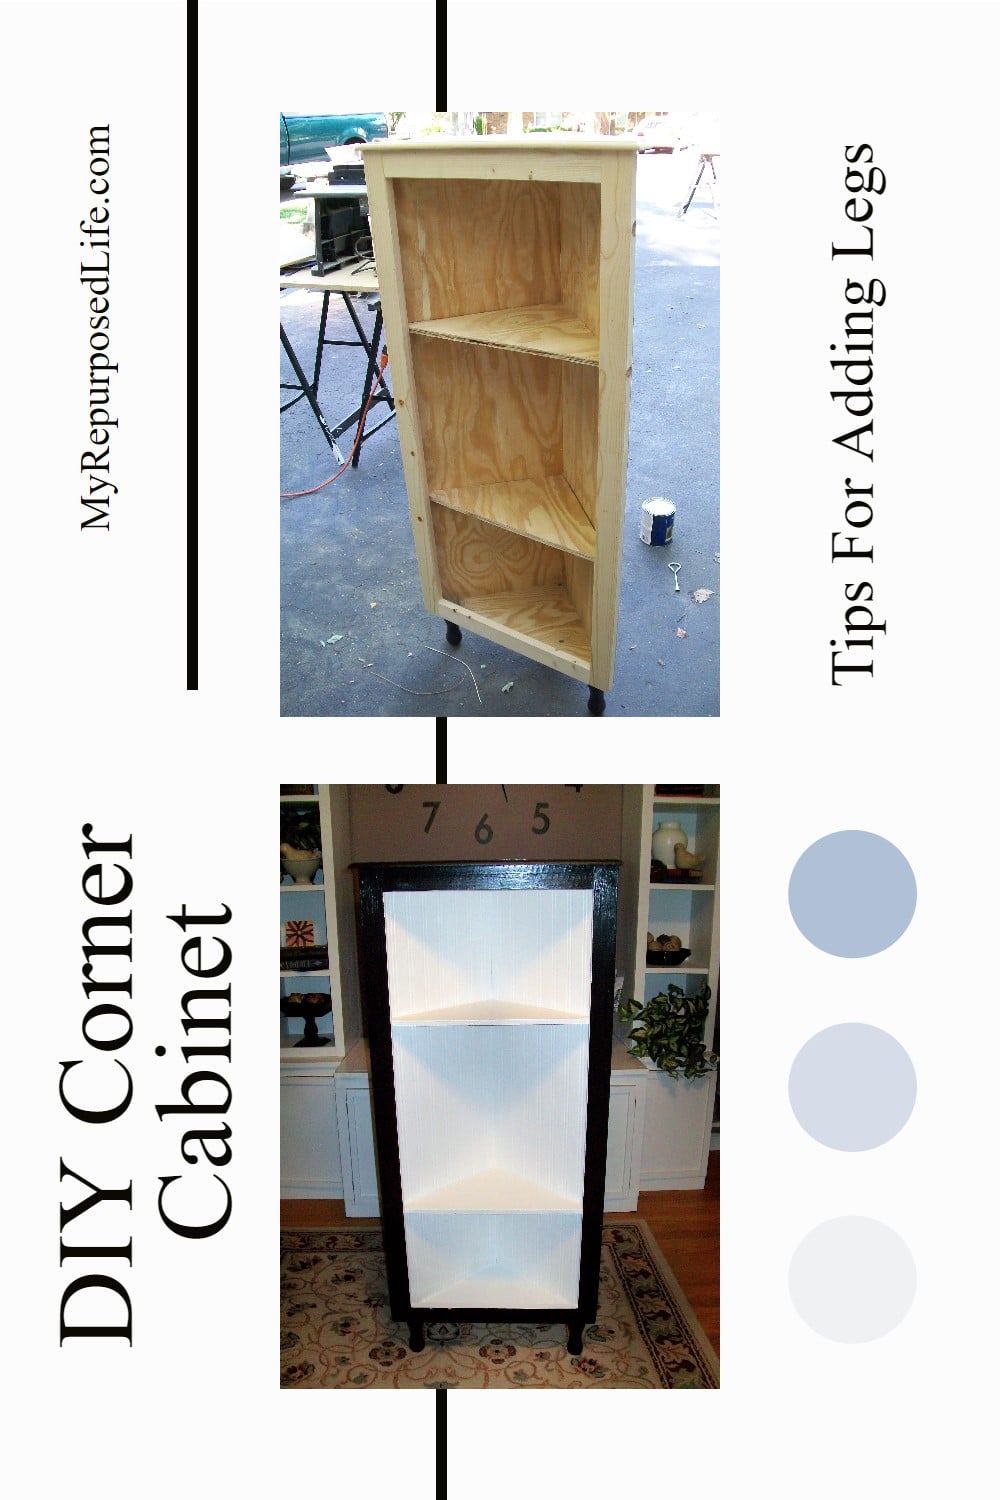 How to make a DIY corner cabinet using cull bin plywood spindle legs and bead board wallpaper. Step by step directions take you through the process. via @repurposedlife